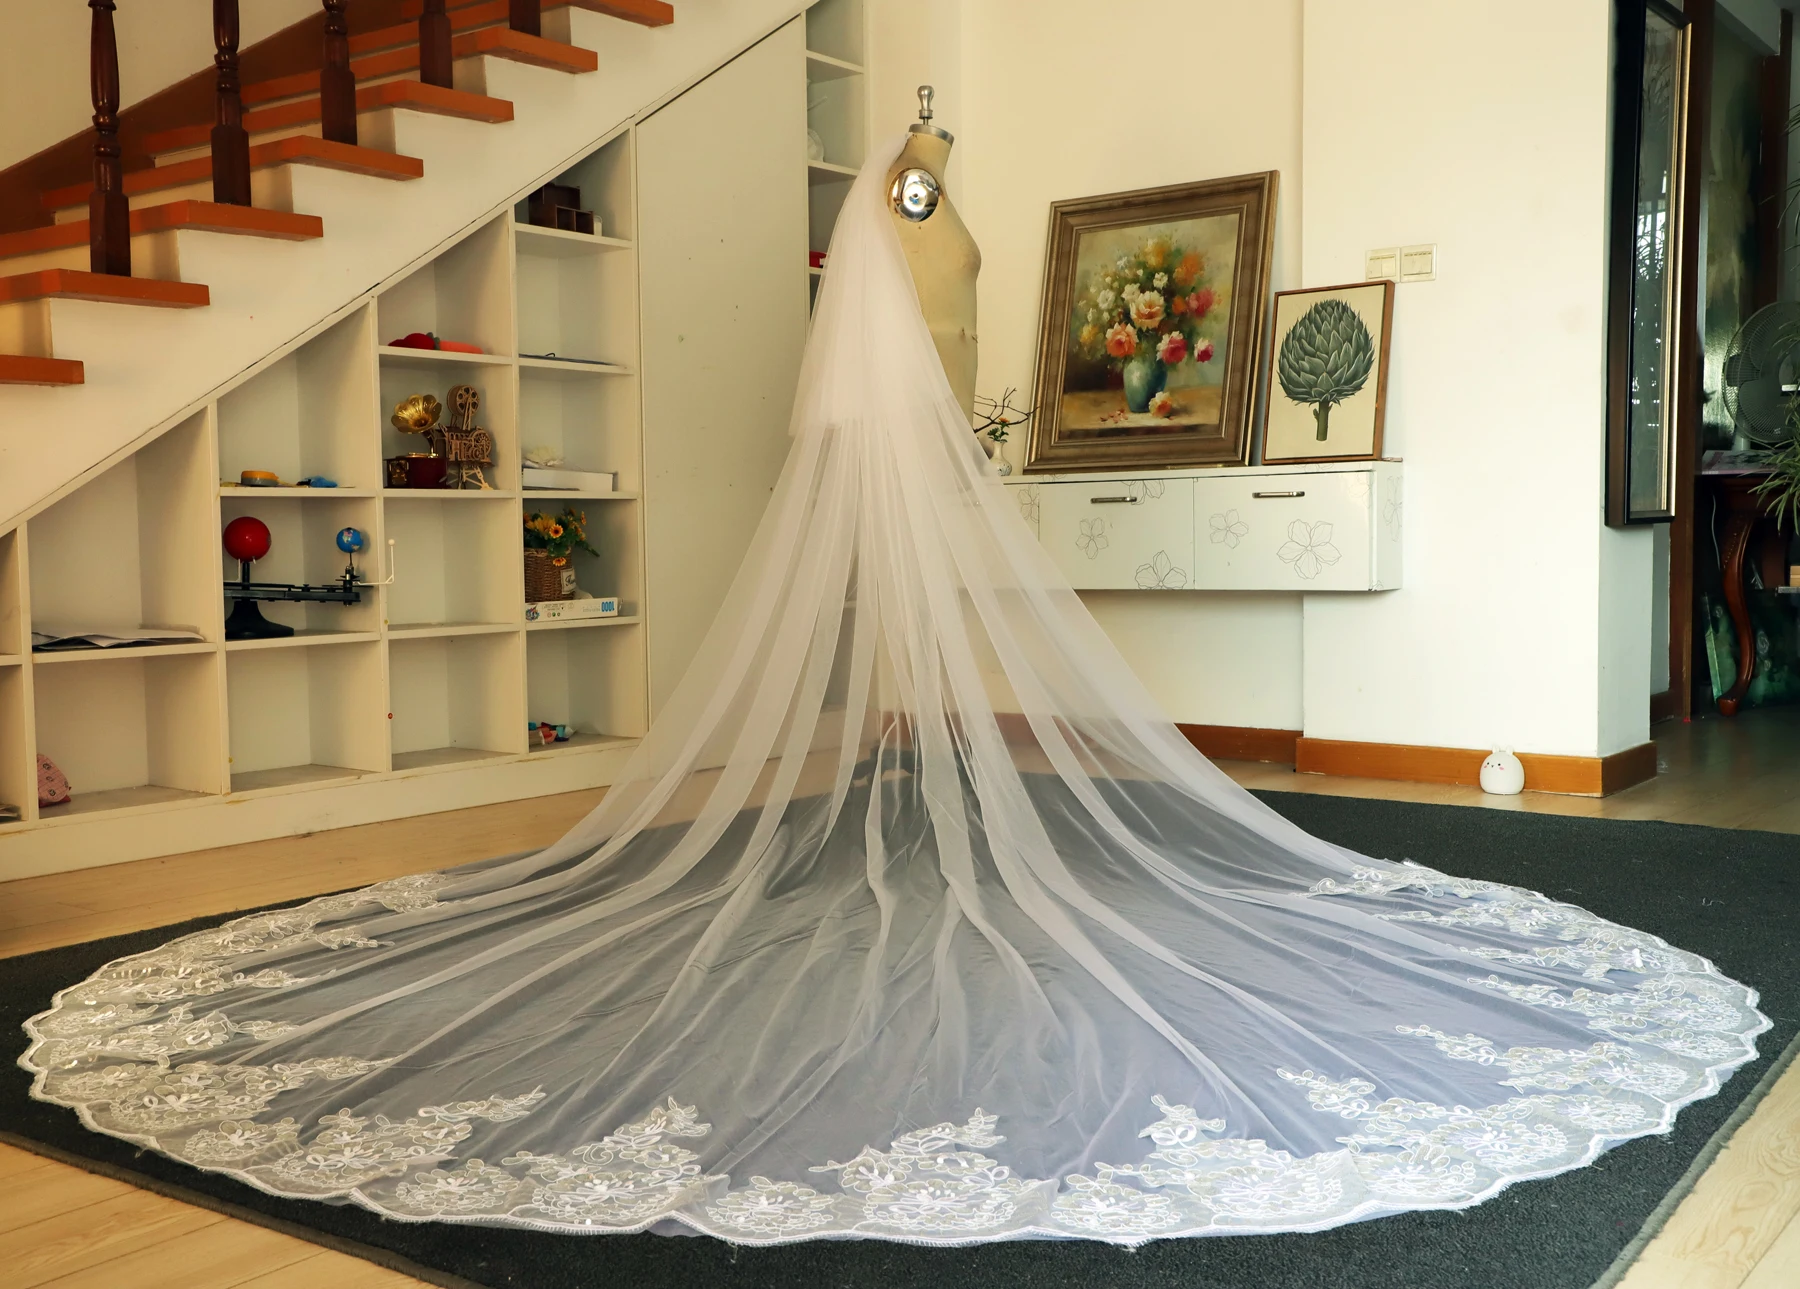 

2 Layers Sequins Lace 3 Meters Cathedral Woodland Wedding Veils with Comb 3M Long White Ivory 2 T Bridal Veils Real Photos